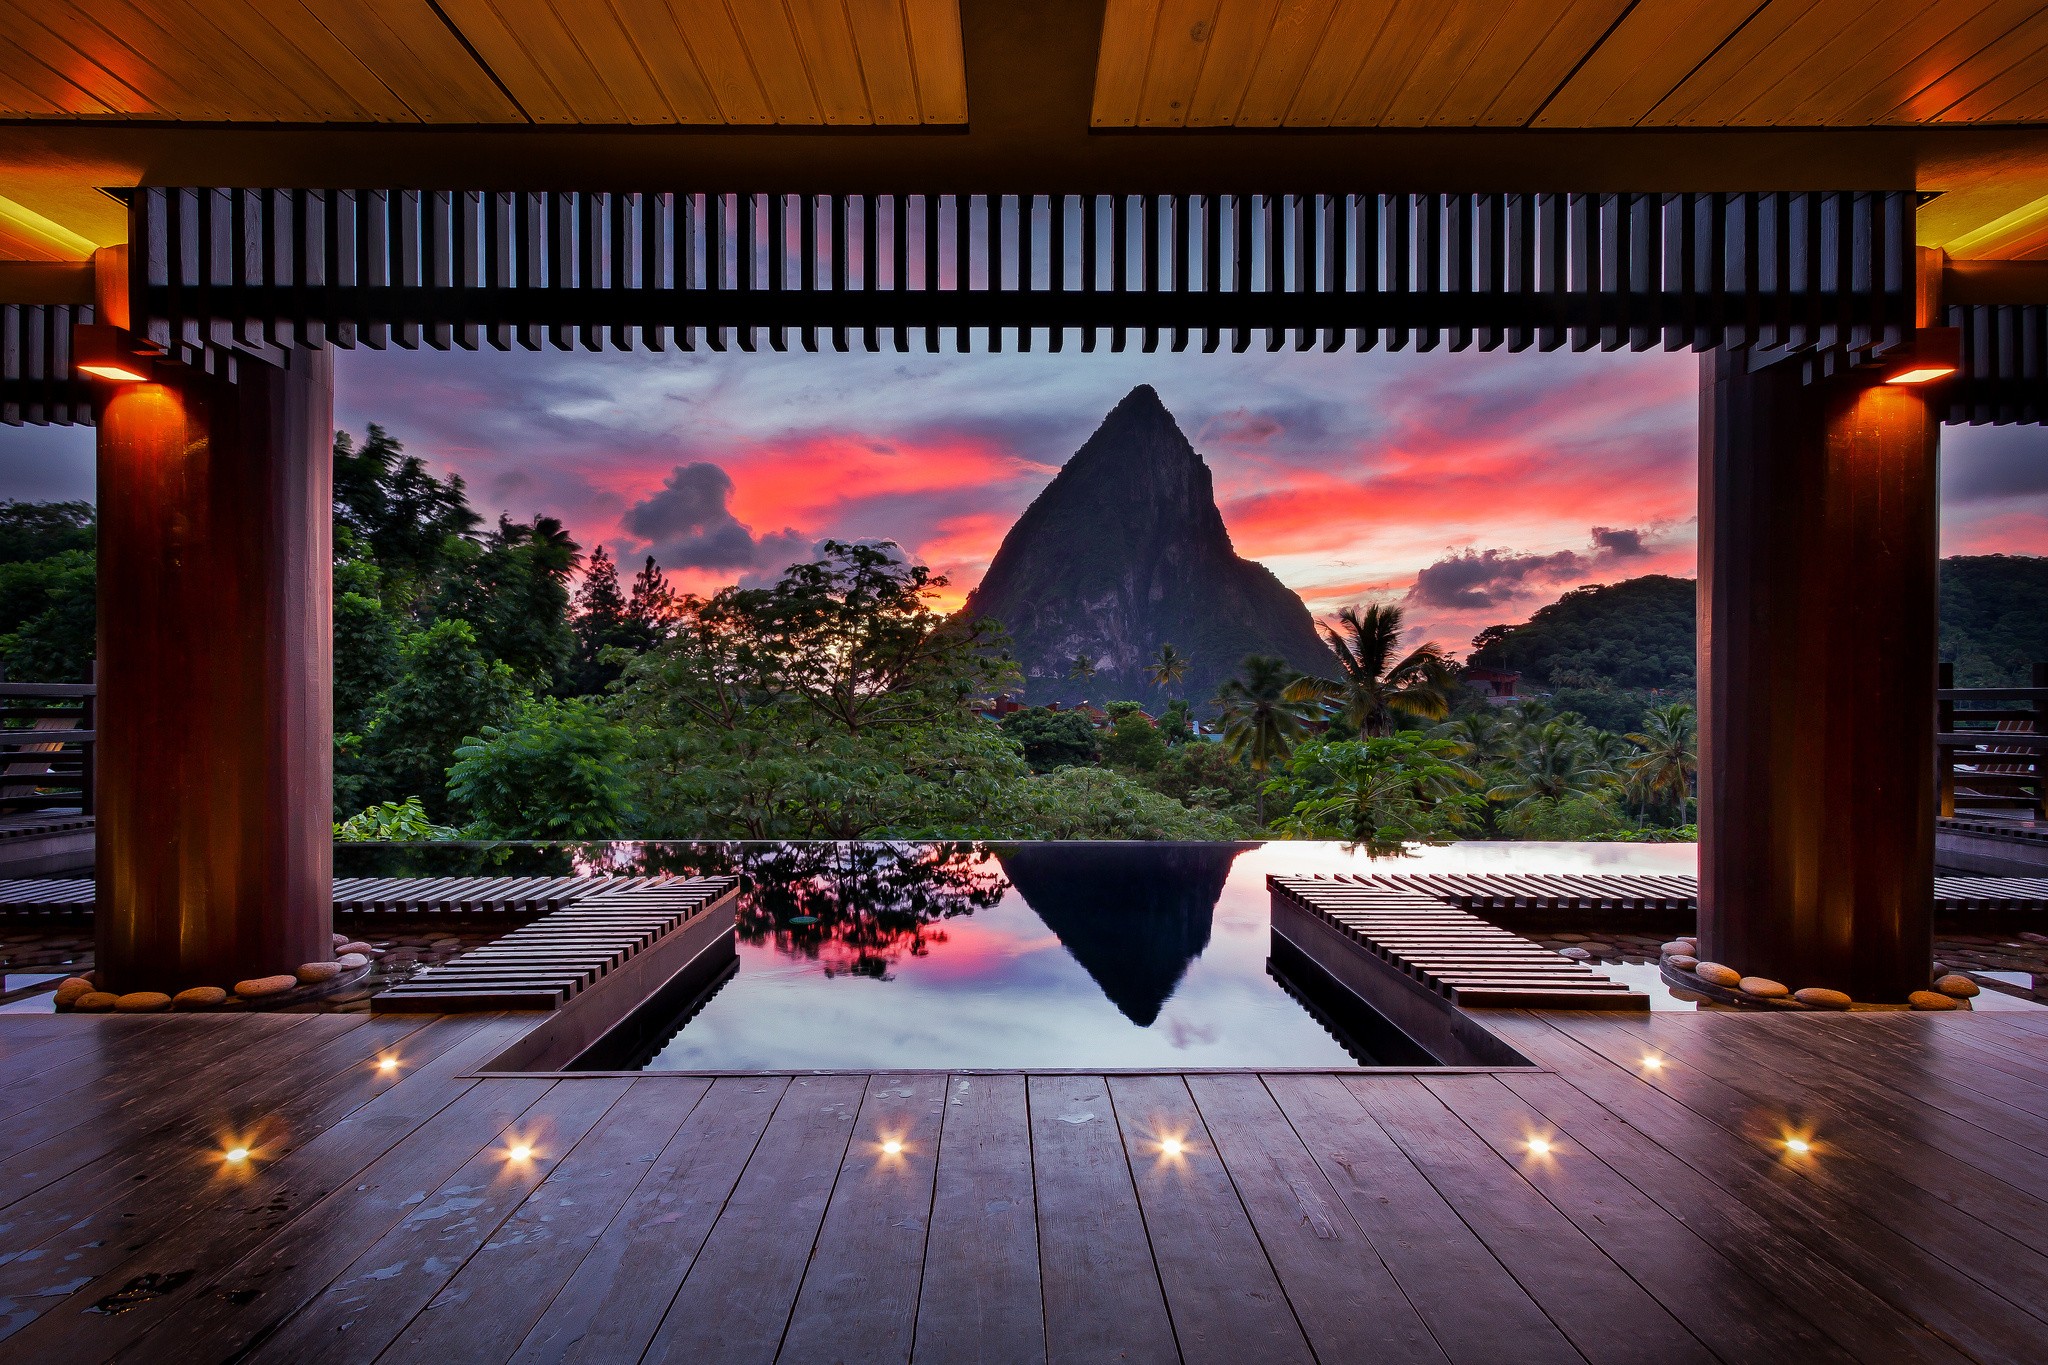 General 2048x1365 sunset hotel St. Lucia luxury sky mountains plants interior